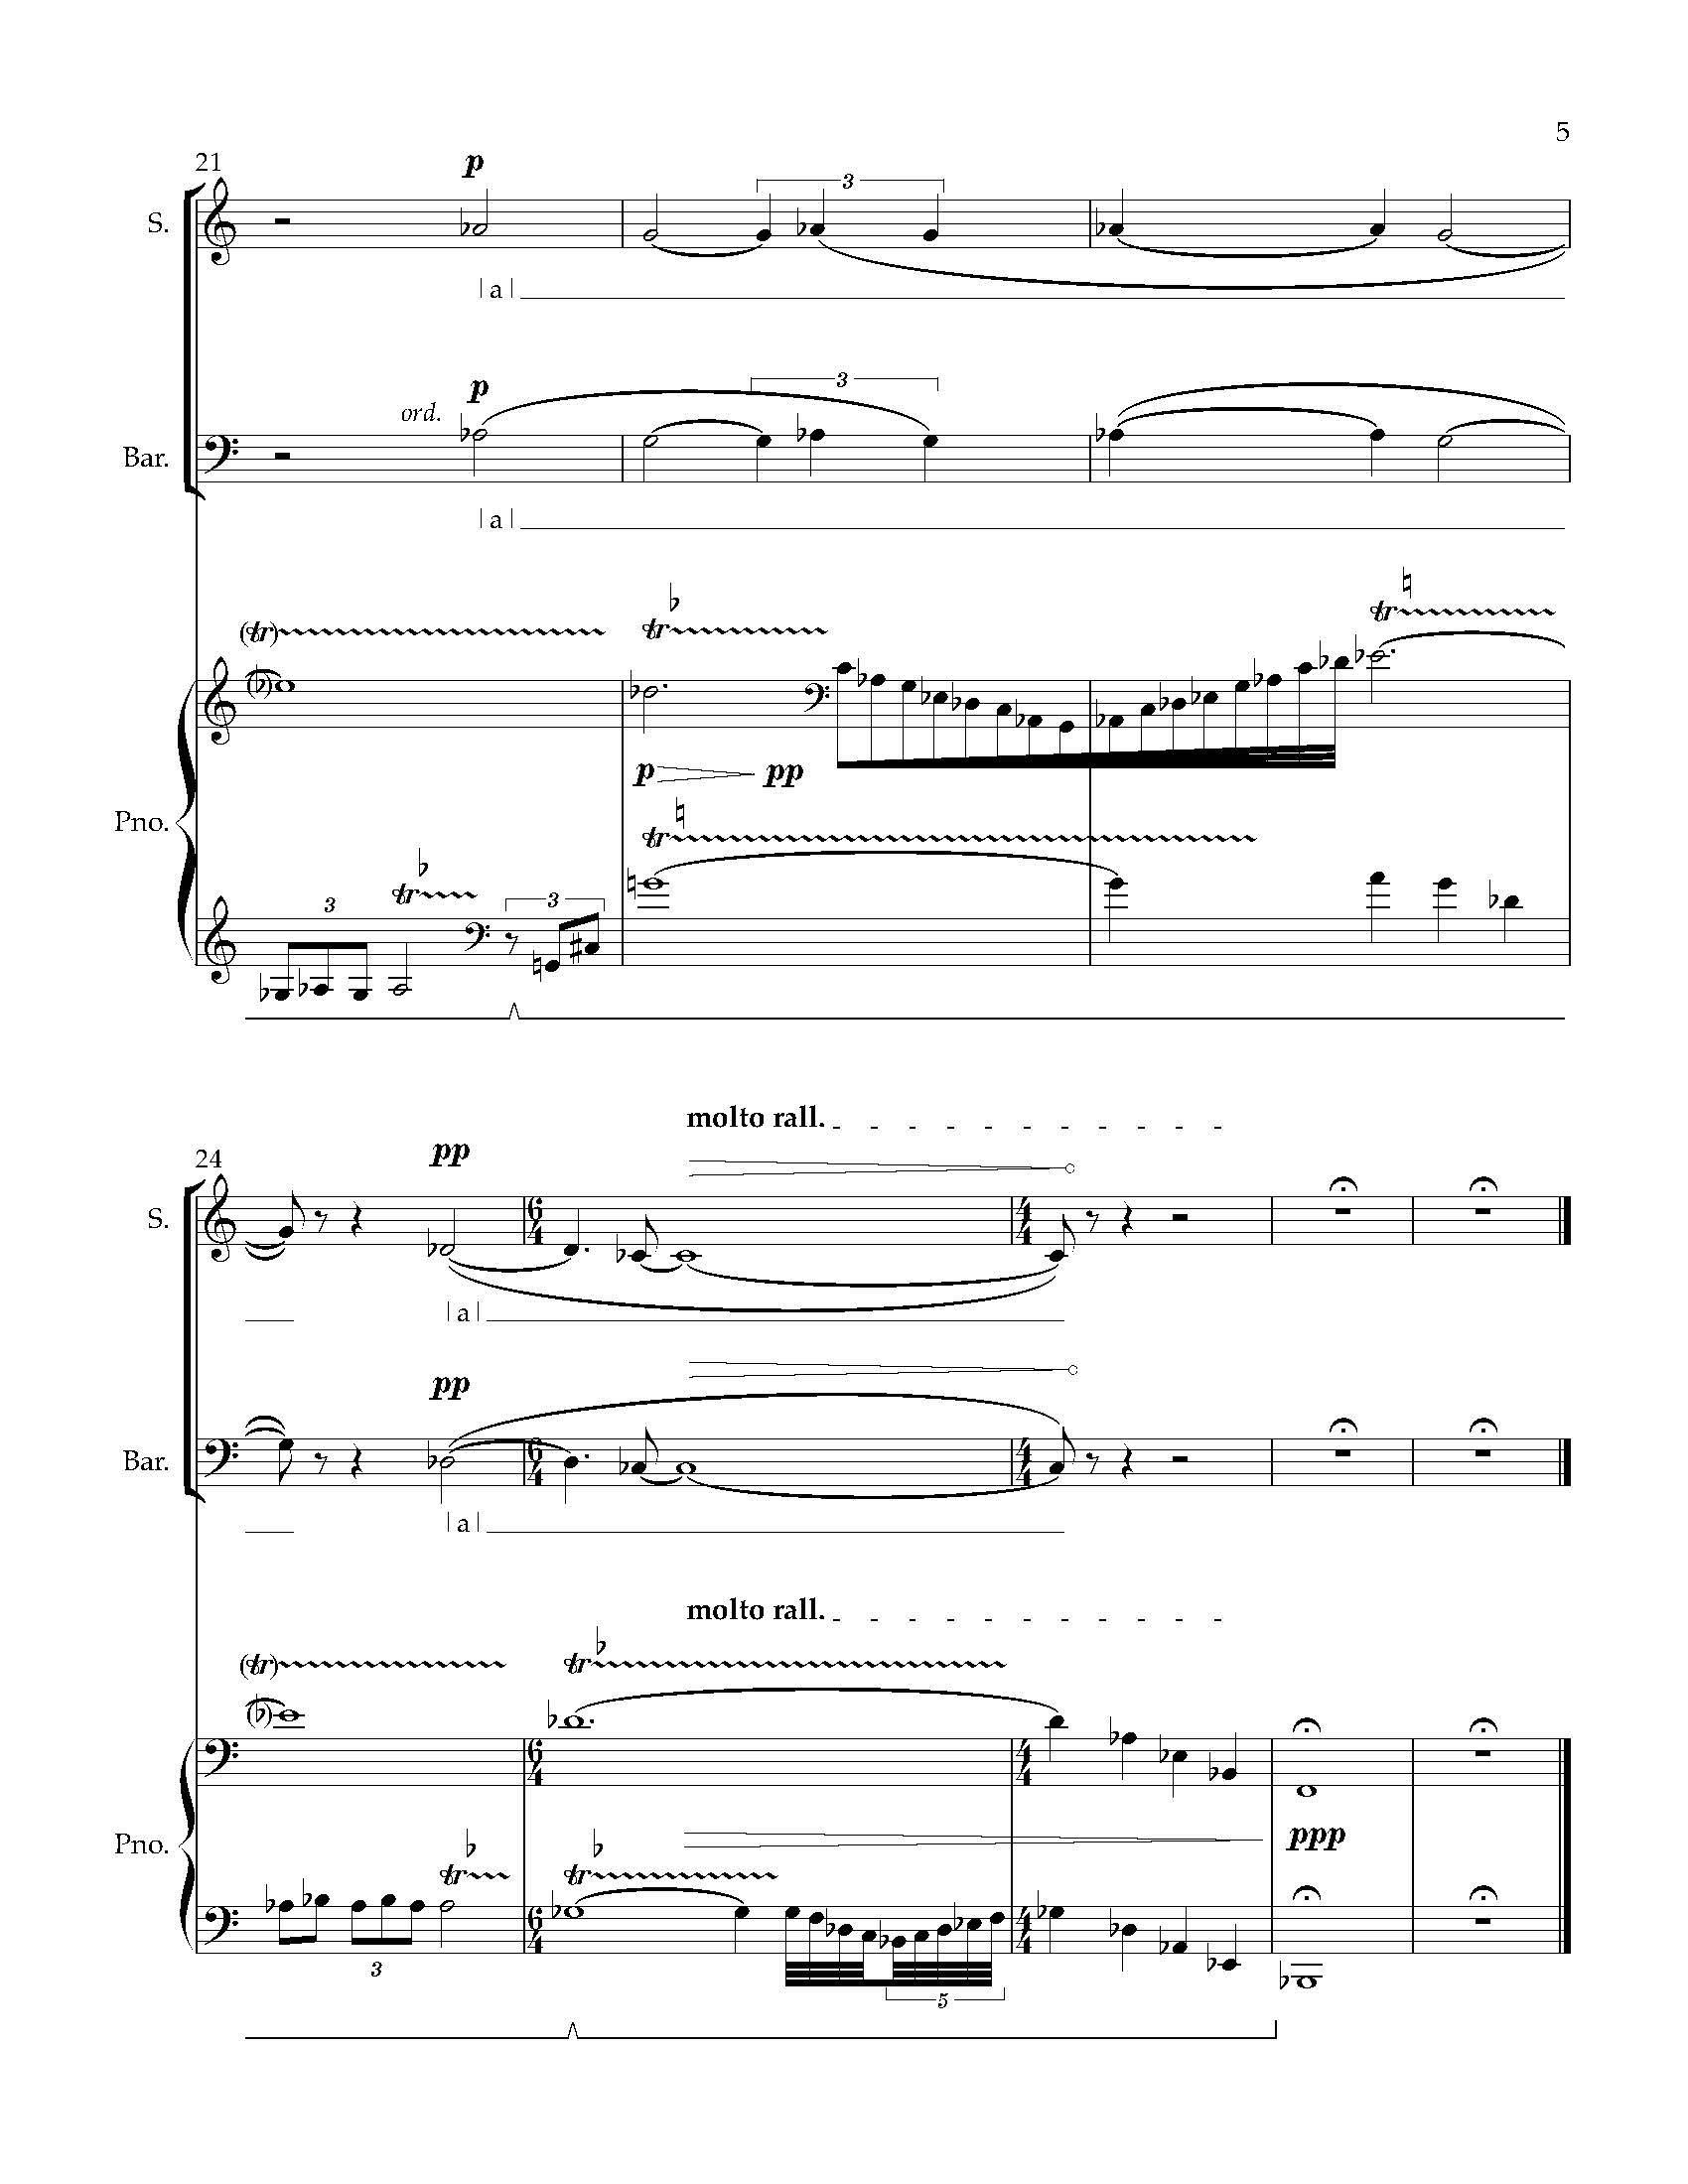 Sky - Complete Score (Revised)_Page_11.jpg